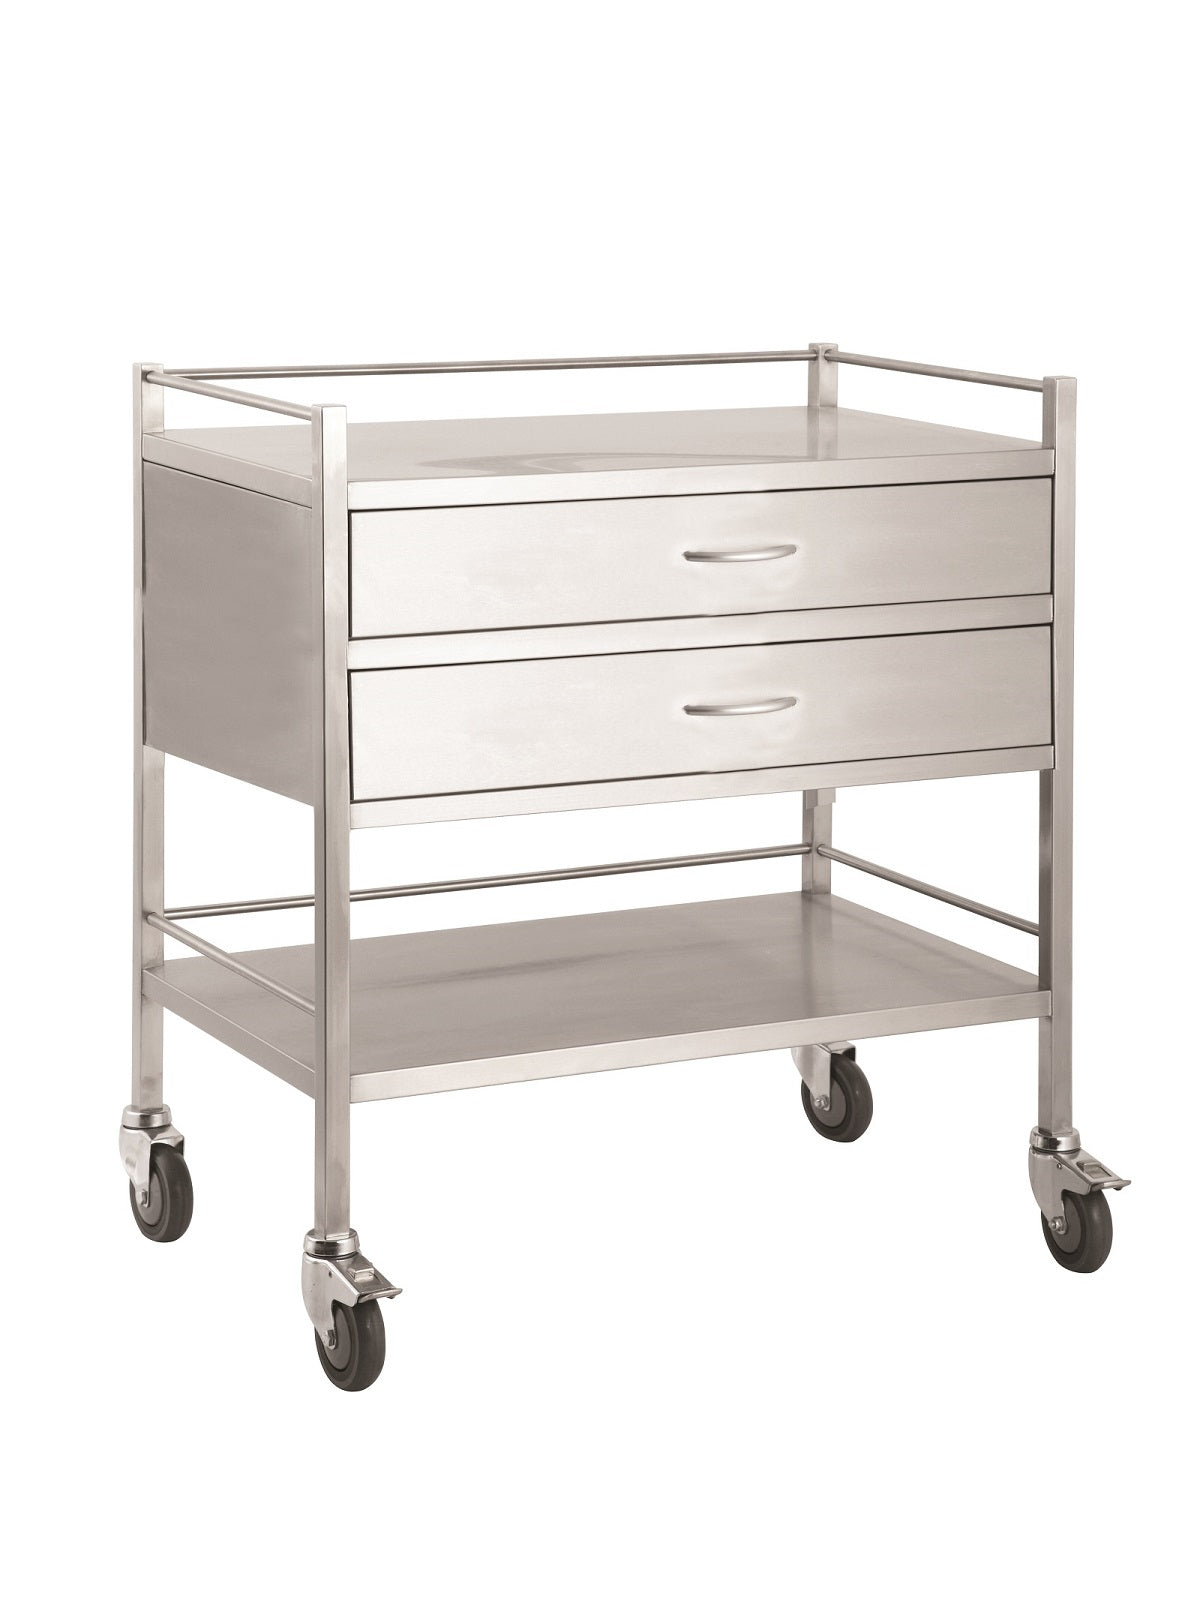 A high grade double two drawer stainless steel trolley. Has top and bottom side rails and lockable castors for safety.